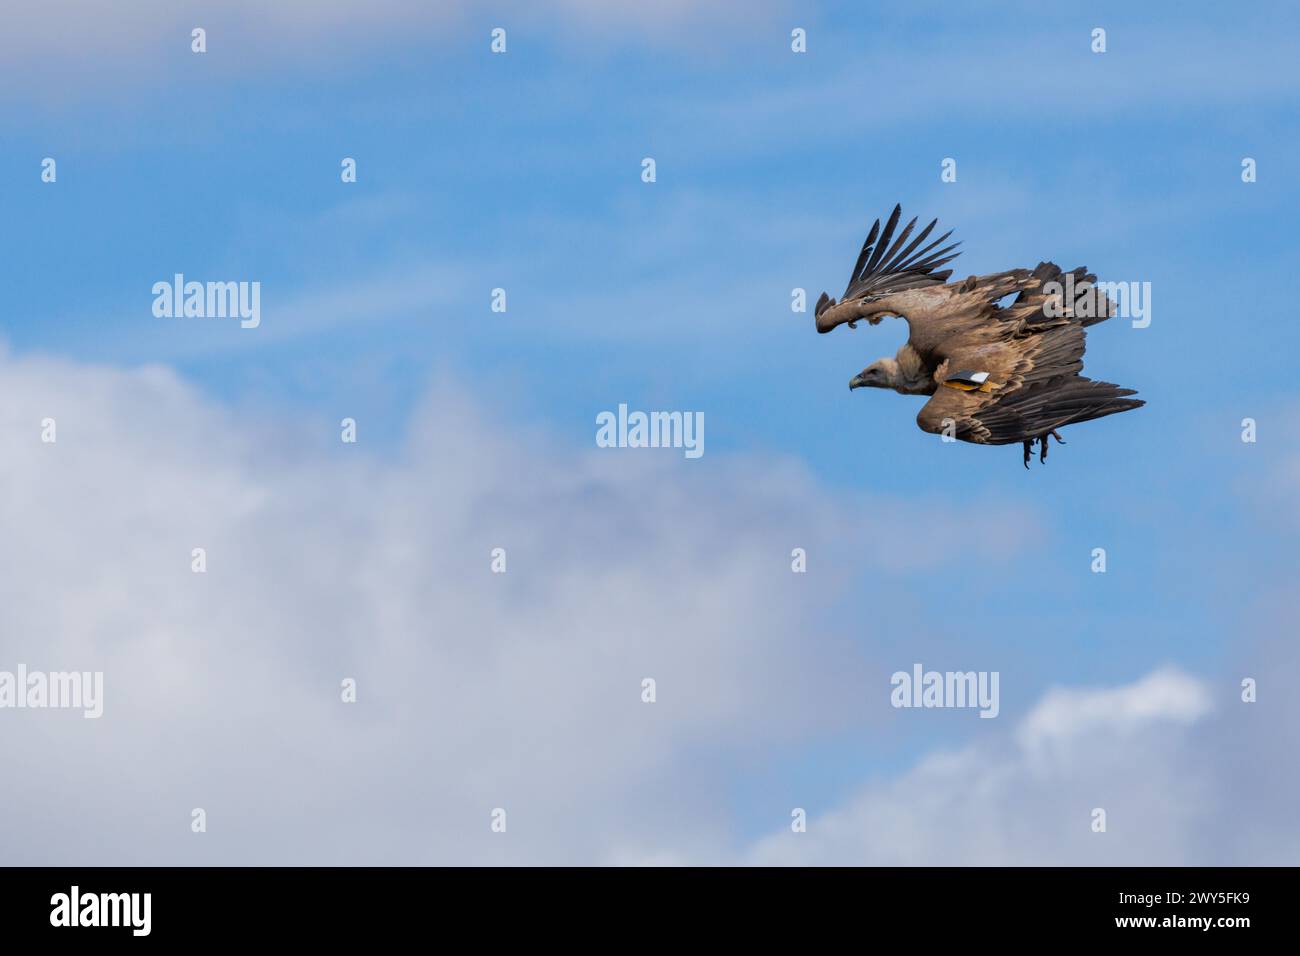 Griffon vulture, Gyps fulvus, flapping its wings during flight over the Cint ravine in Alcoy, Spain Stock Photo